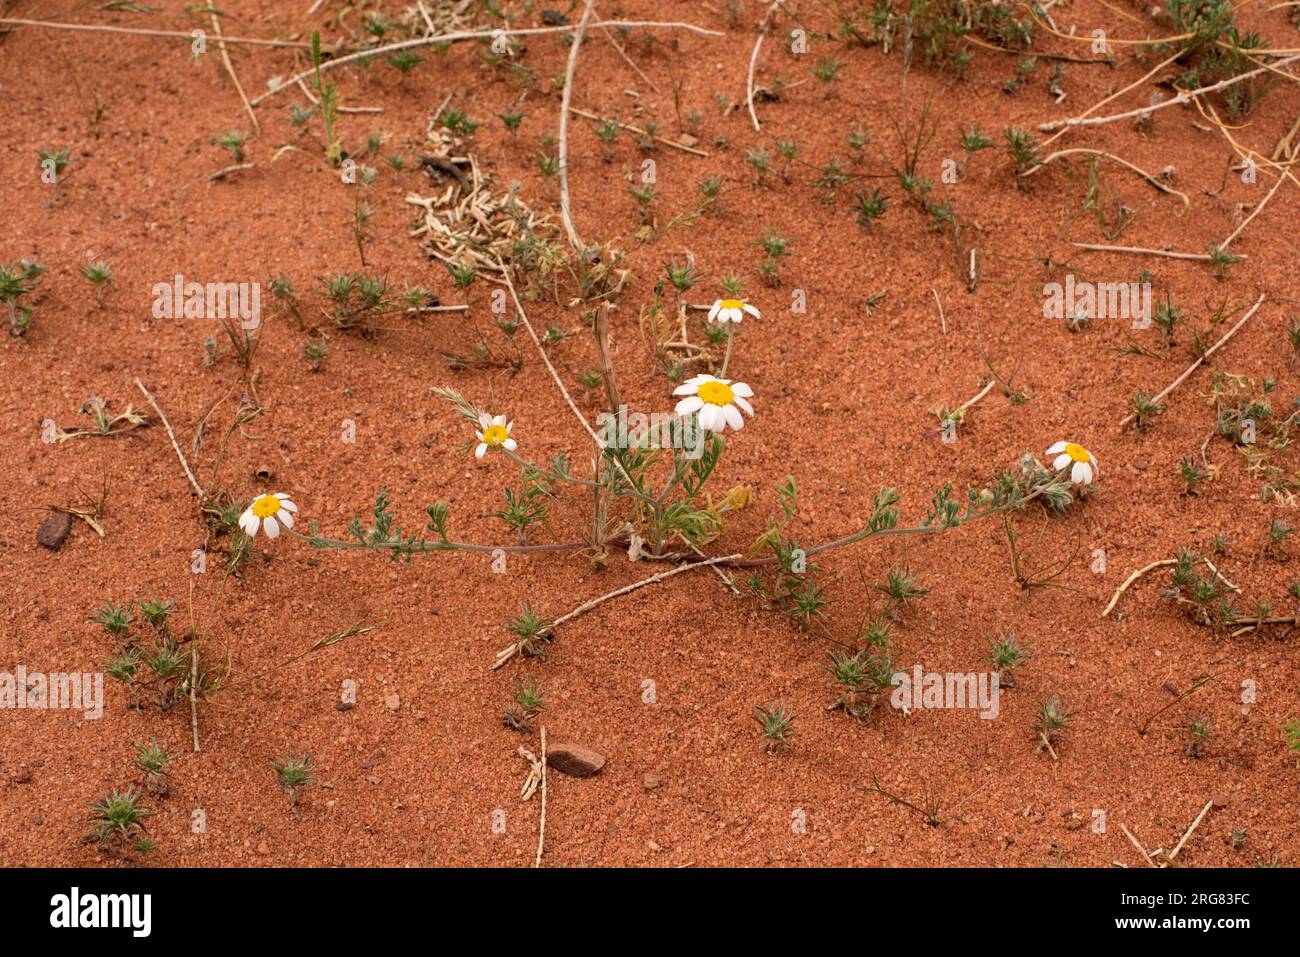 Anthemis or Klasea haussknechtii is an annual herb that lives in Middle East deserts. Angiosperms. Eudicots. Asteraceae. This photo was taken in Wadi Stock Photo